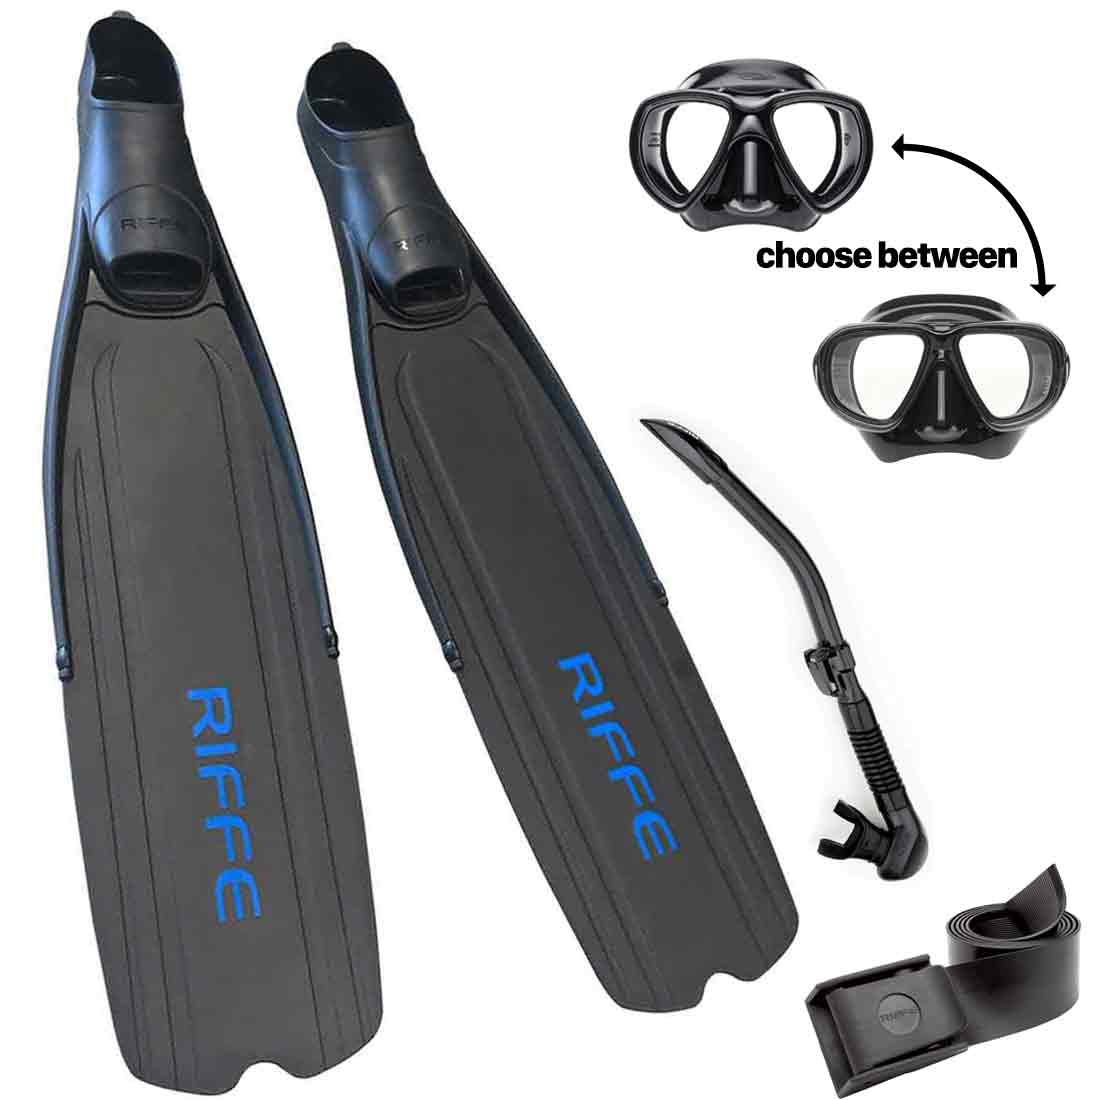 Riffe Basic Freediver Package: Start Your Journey